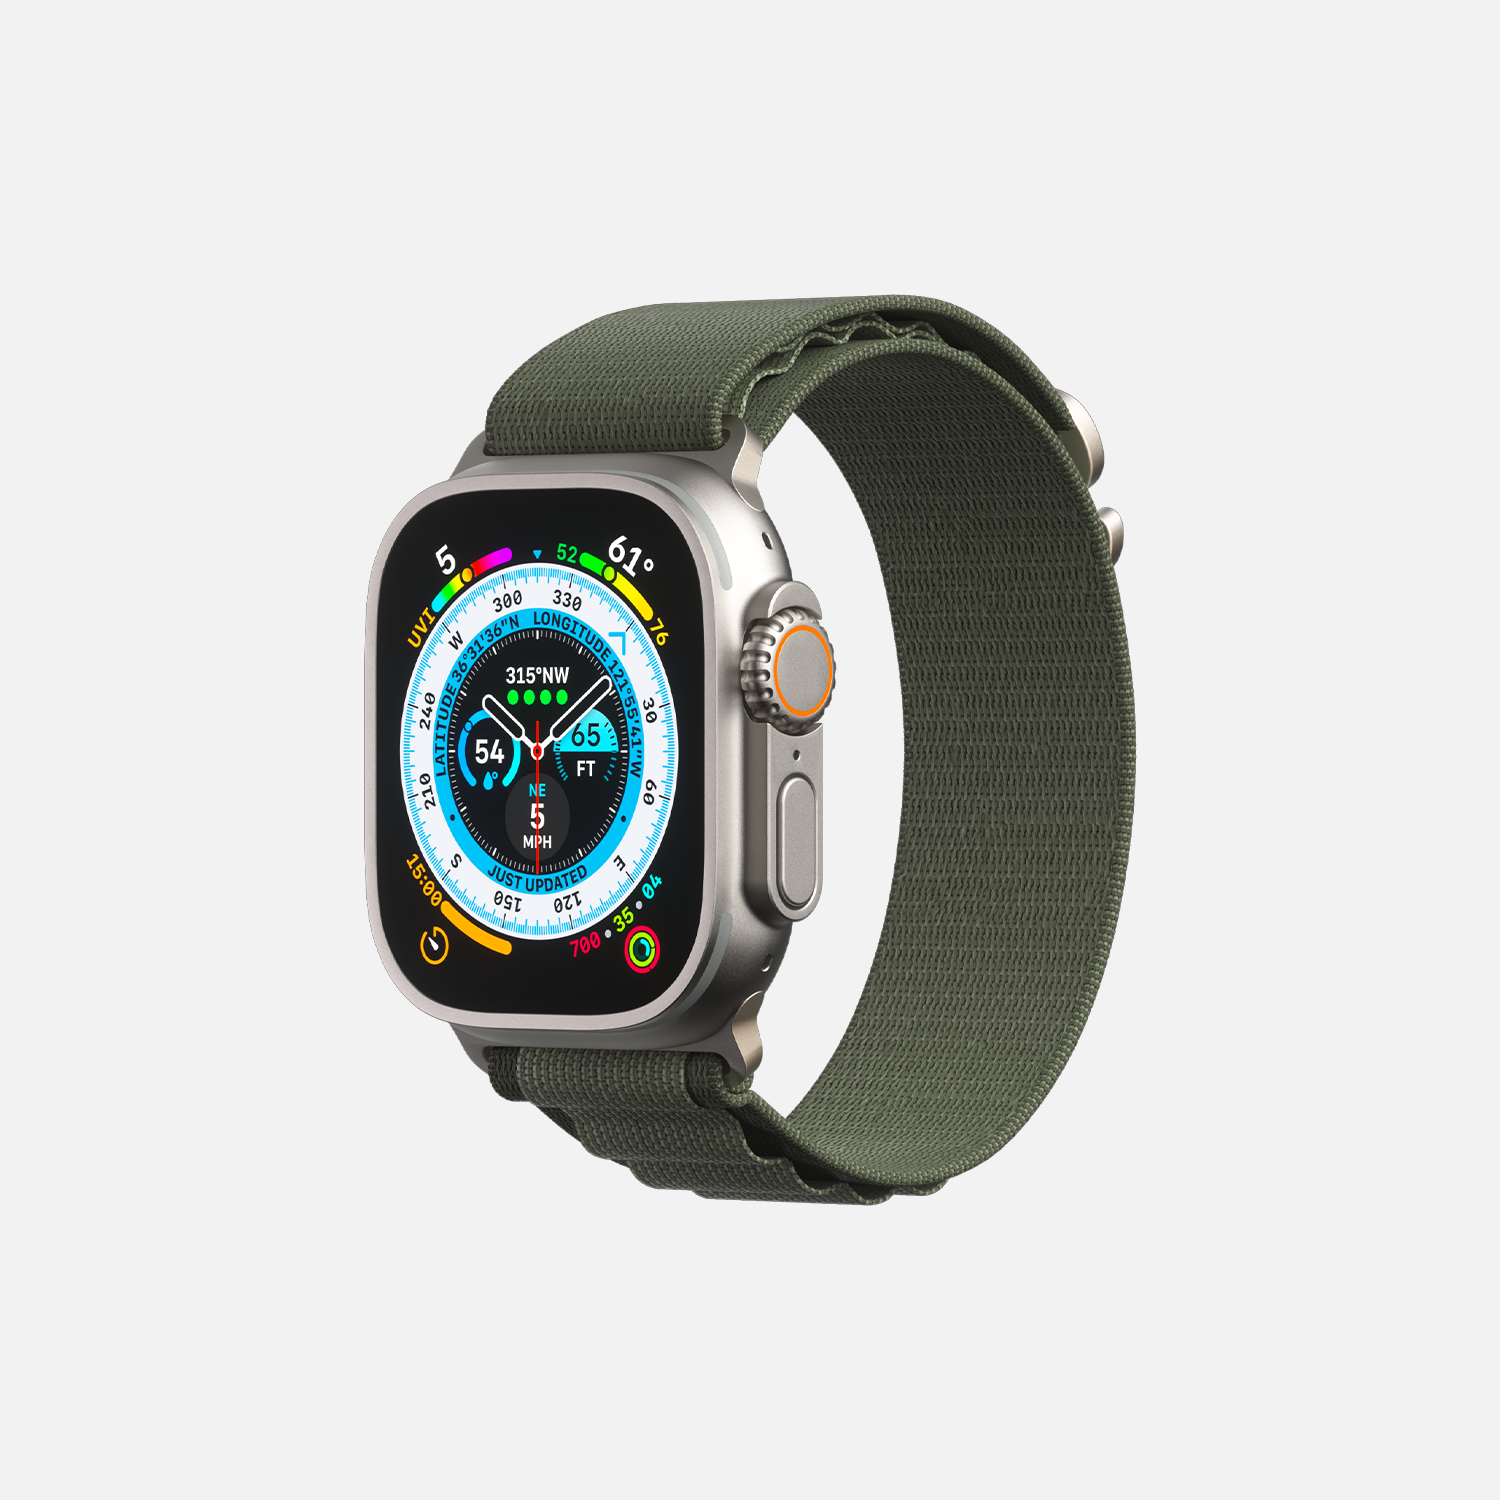 Smartwatch with navigational watch face and sage green strap on a white background.